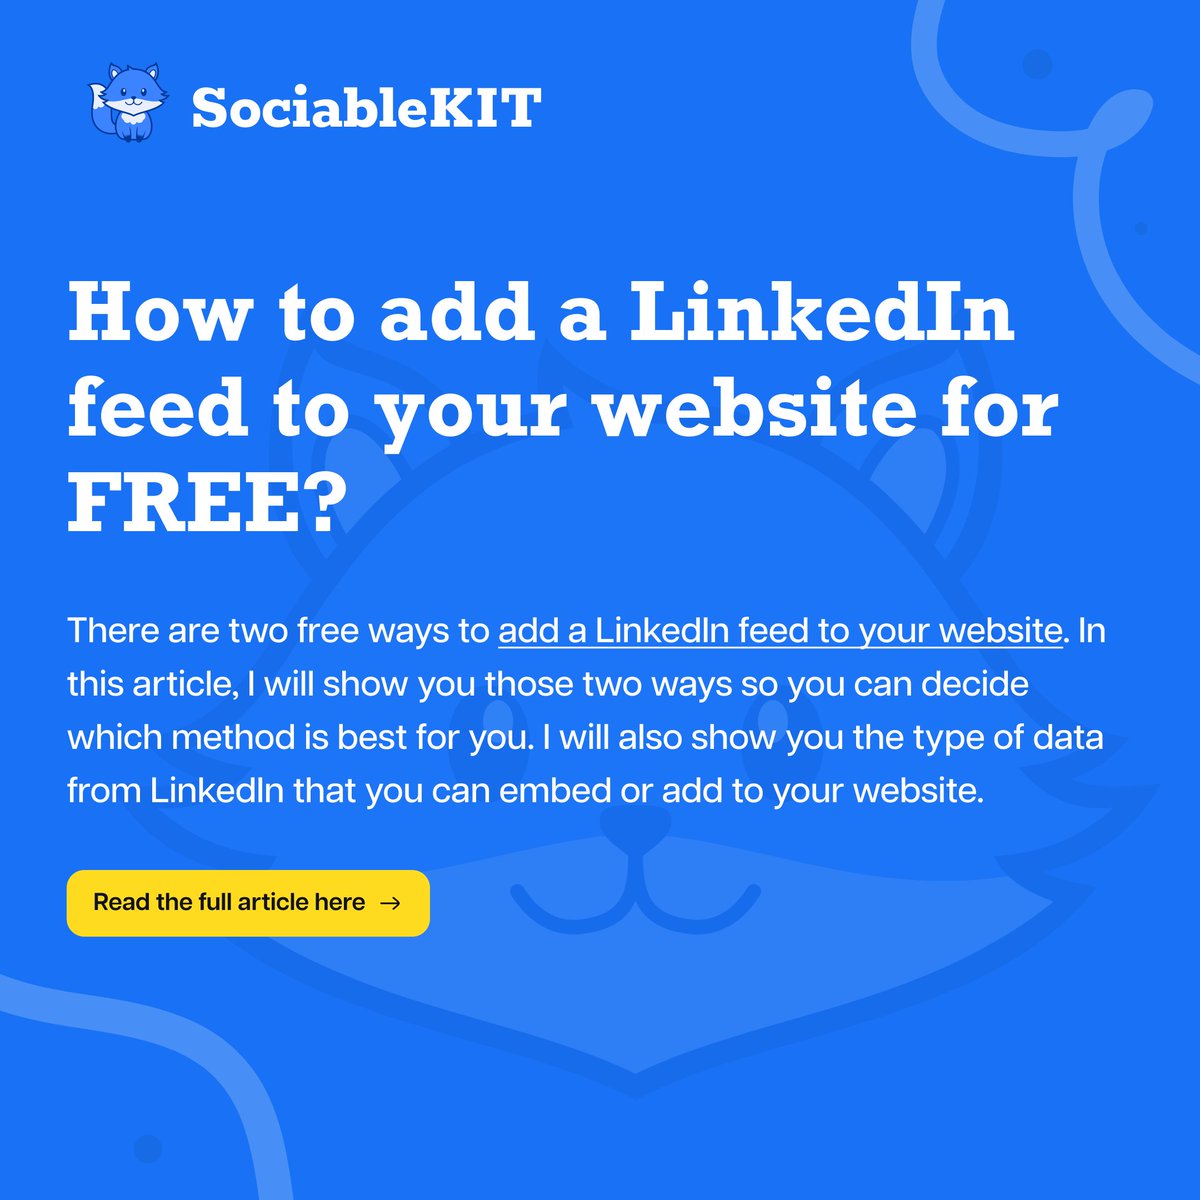 Want to add a LinkedIn feed to your website for free? Our new article will guide you through two easy methods to get it done. Follow the steps and improve your website today!

 Read more: linkedin.com/pulse/how-add-…

#LinkedIn #WebsiteIntegration #SociableKIT #WebTips #SimpleGuide